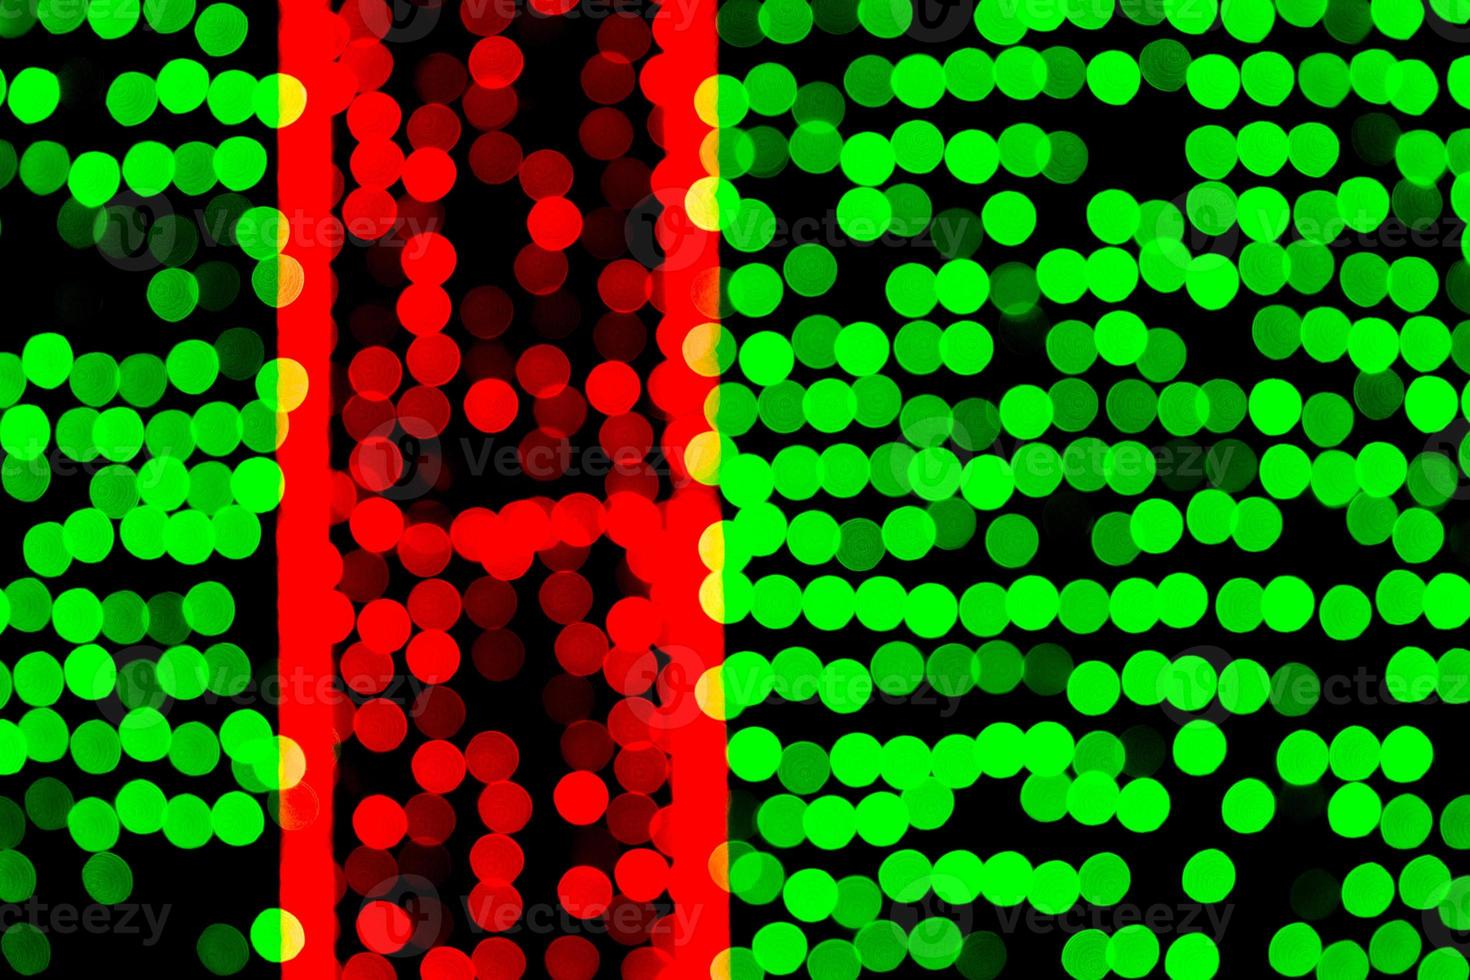 Unfocused abstract green and red bokeh on black background. defocused and blurred many round light photo